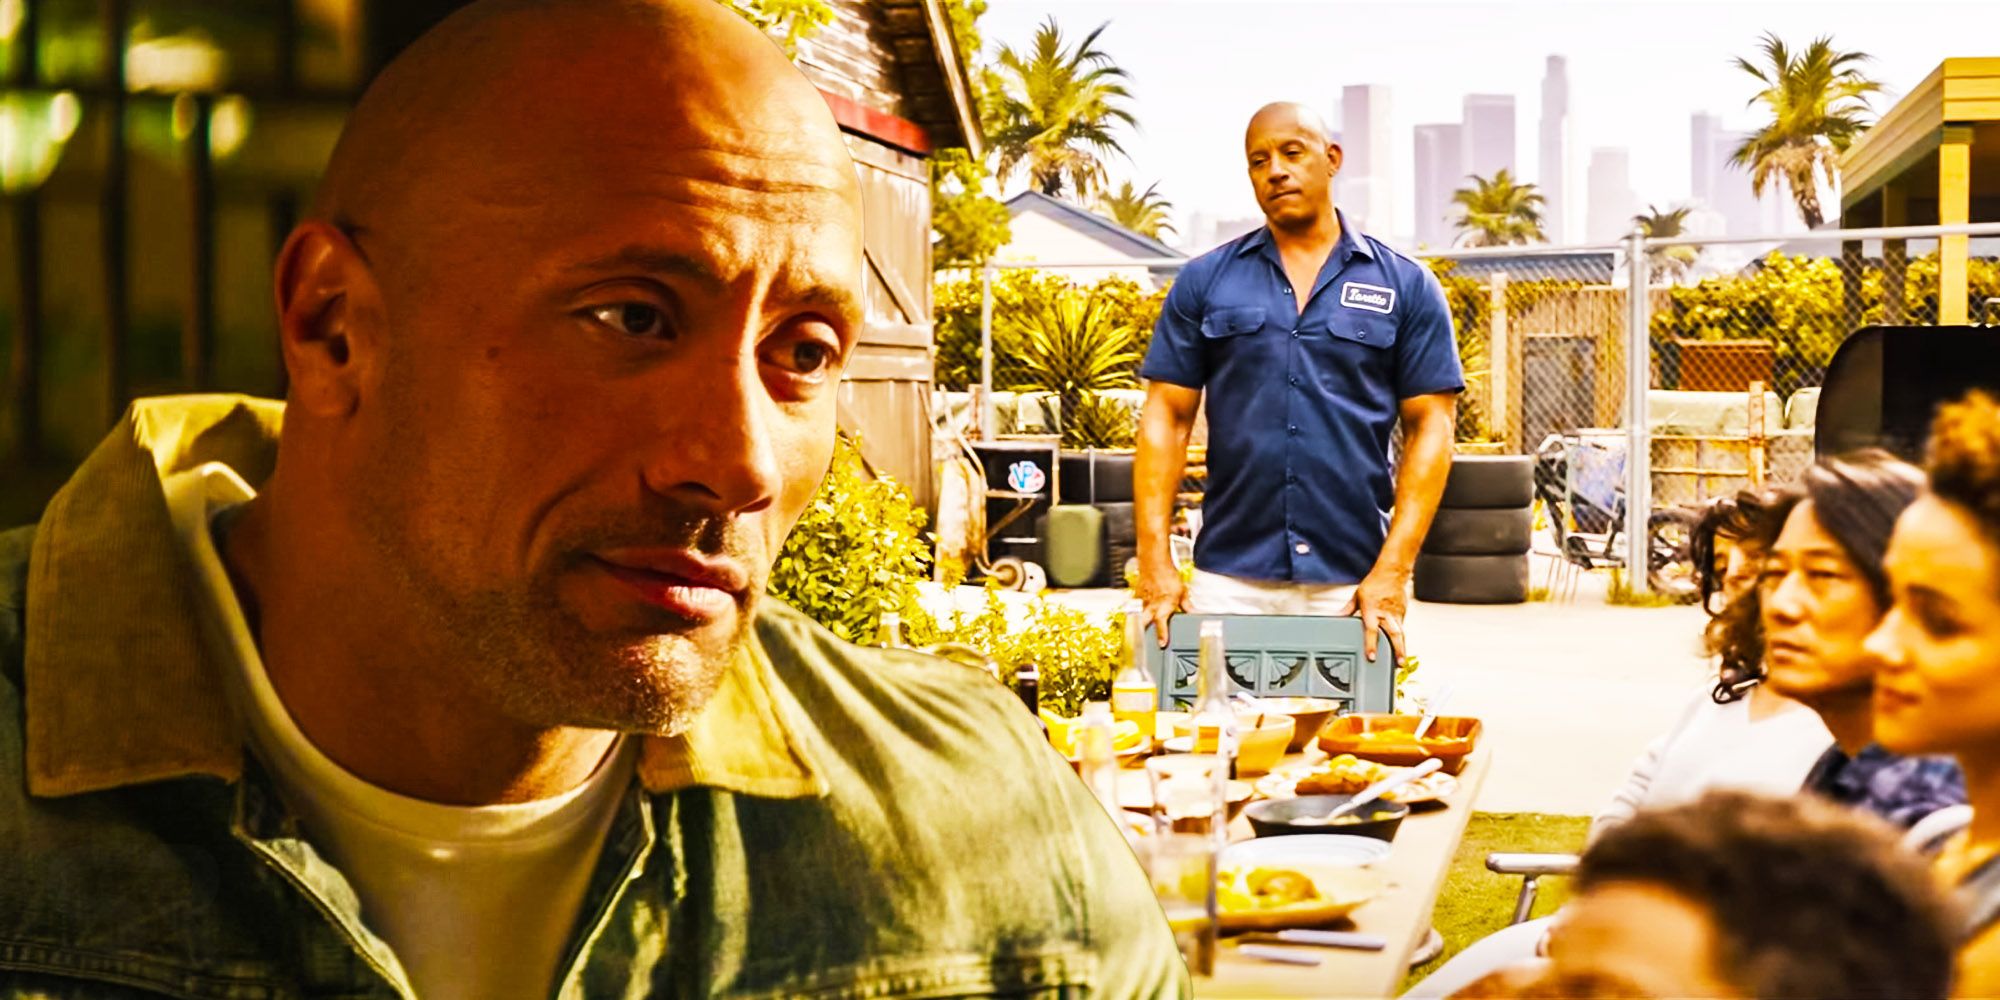 The Rock as Hobbs and the Fast X cast